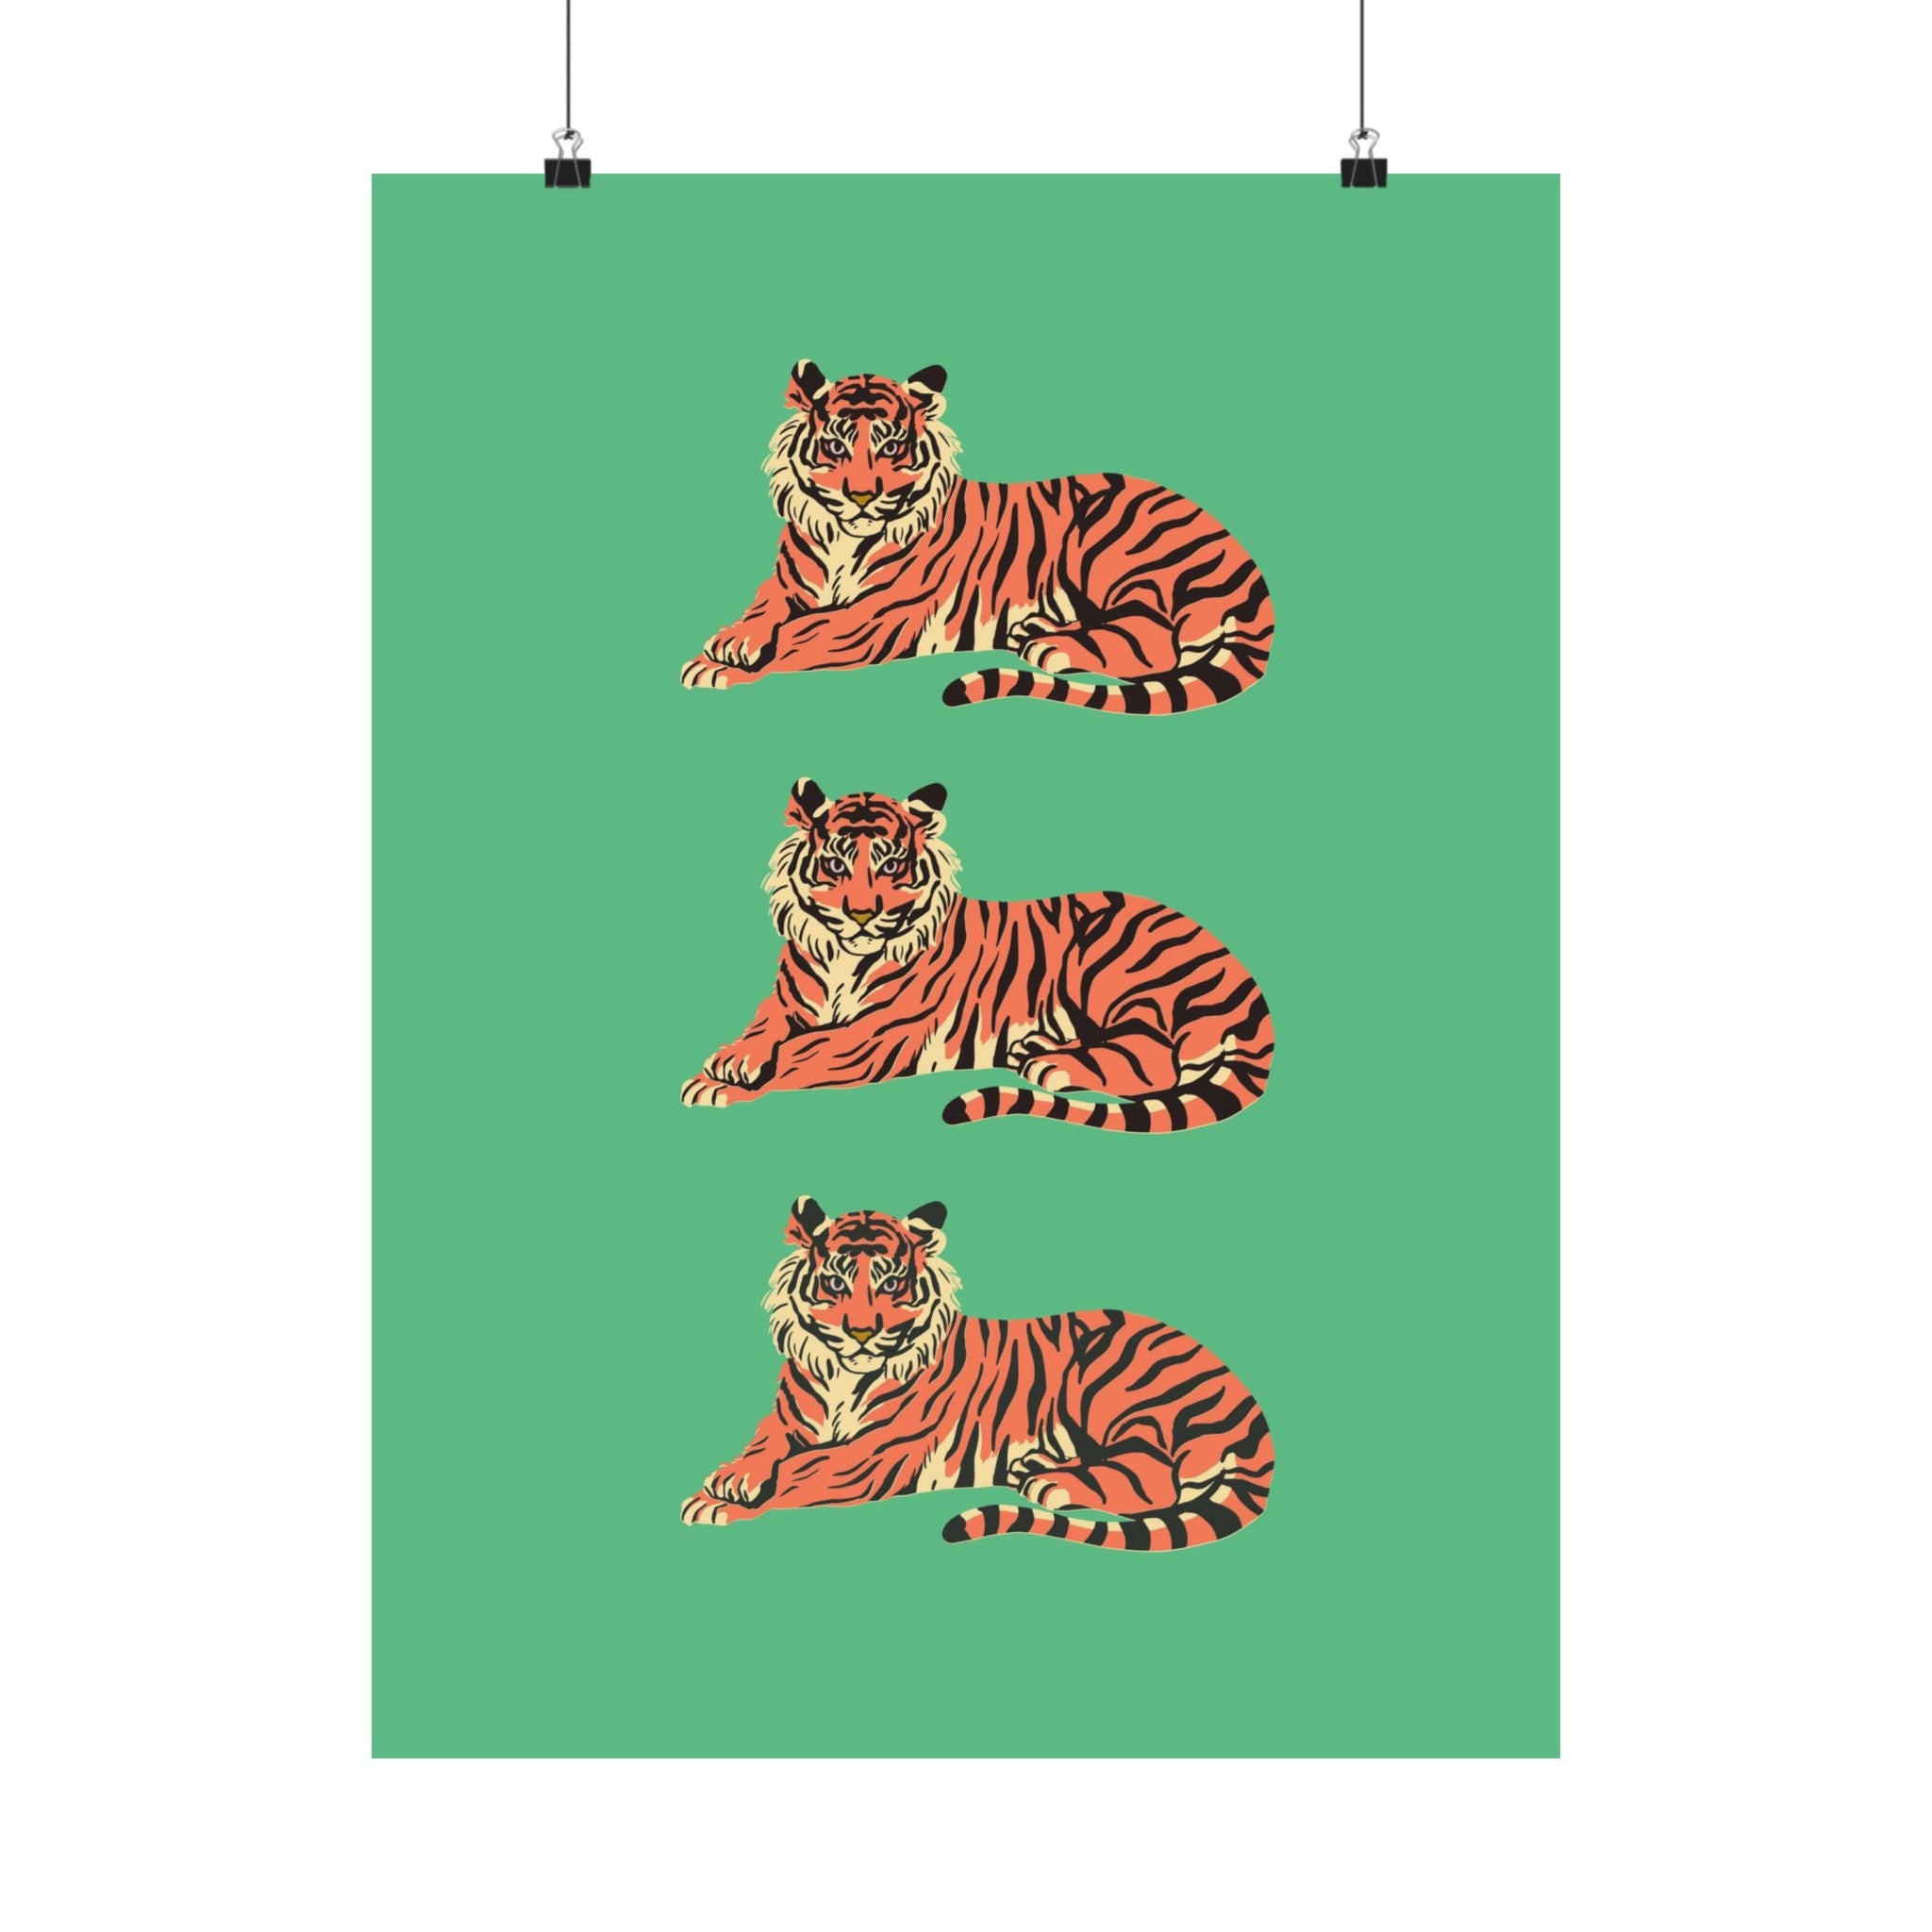 Green Tiger Physical Poster